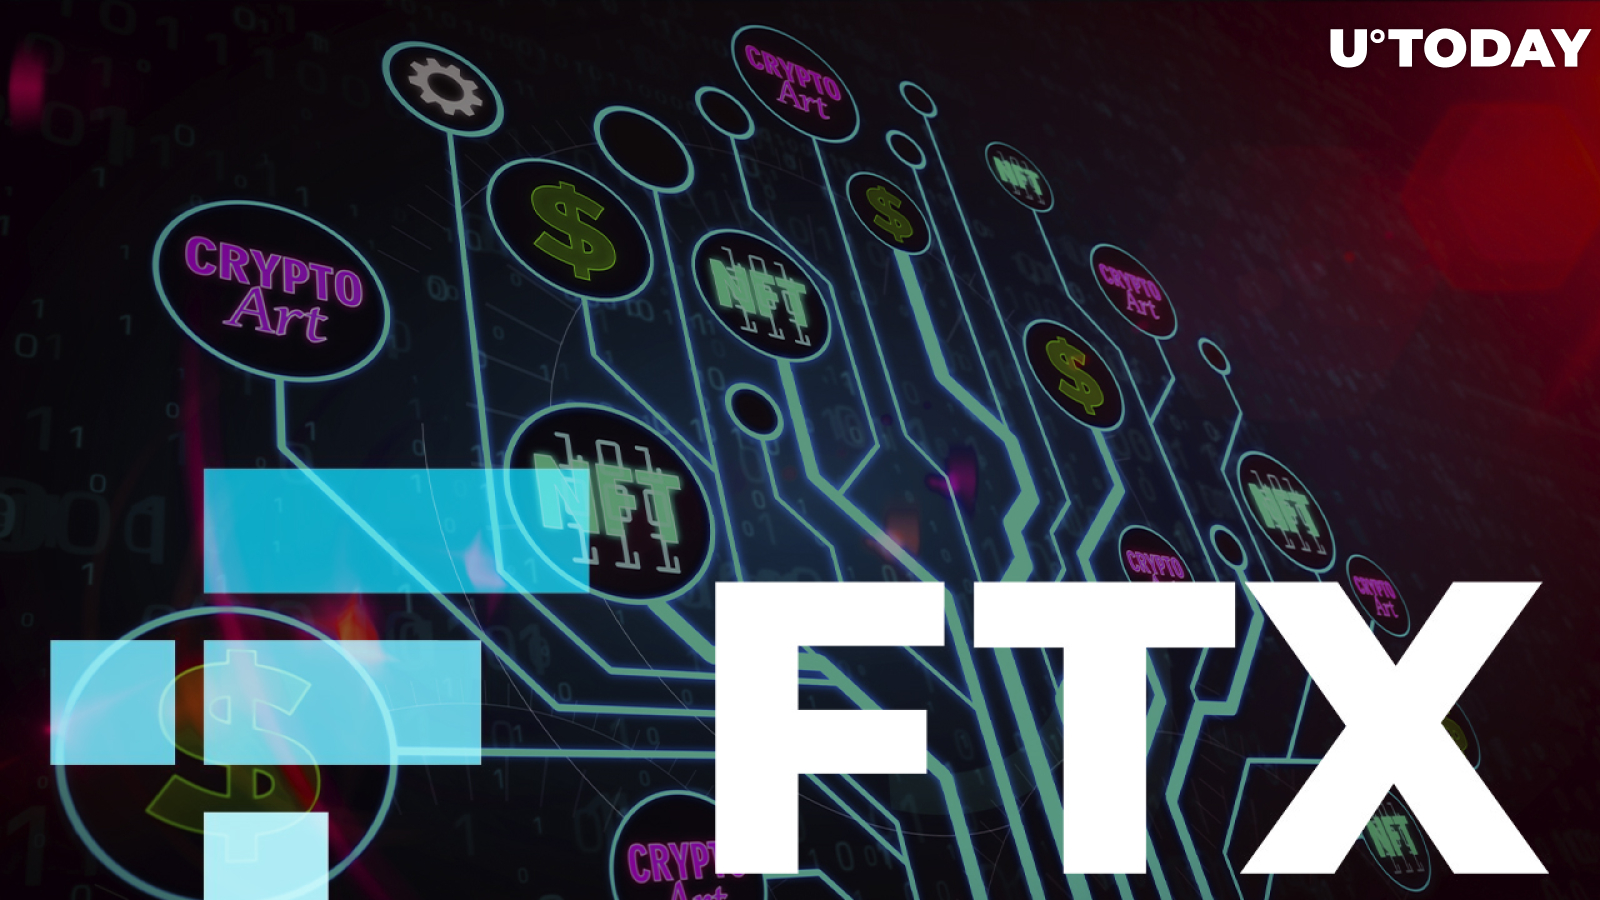 FTX Crypto Giant Debuts in Gaming Space to Attract Publishers to Crypto and NFTs